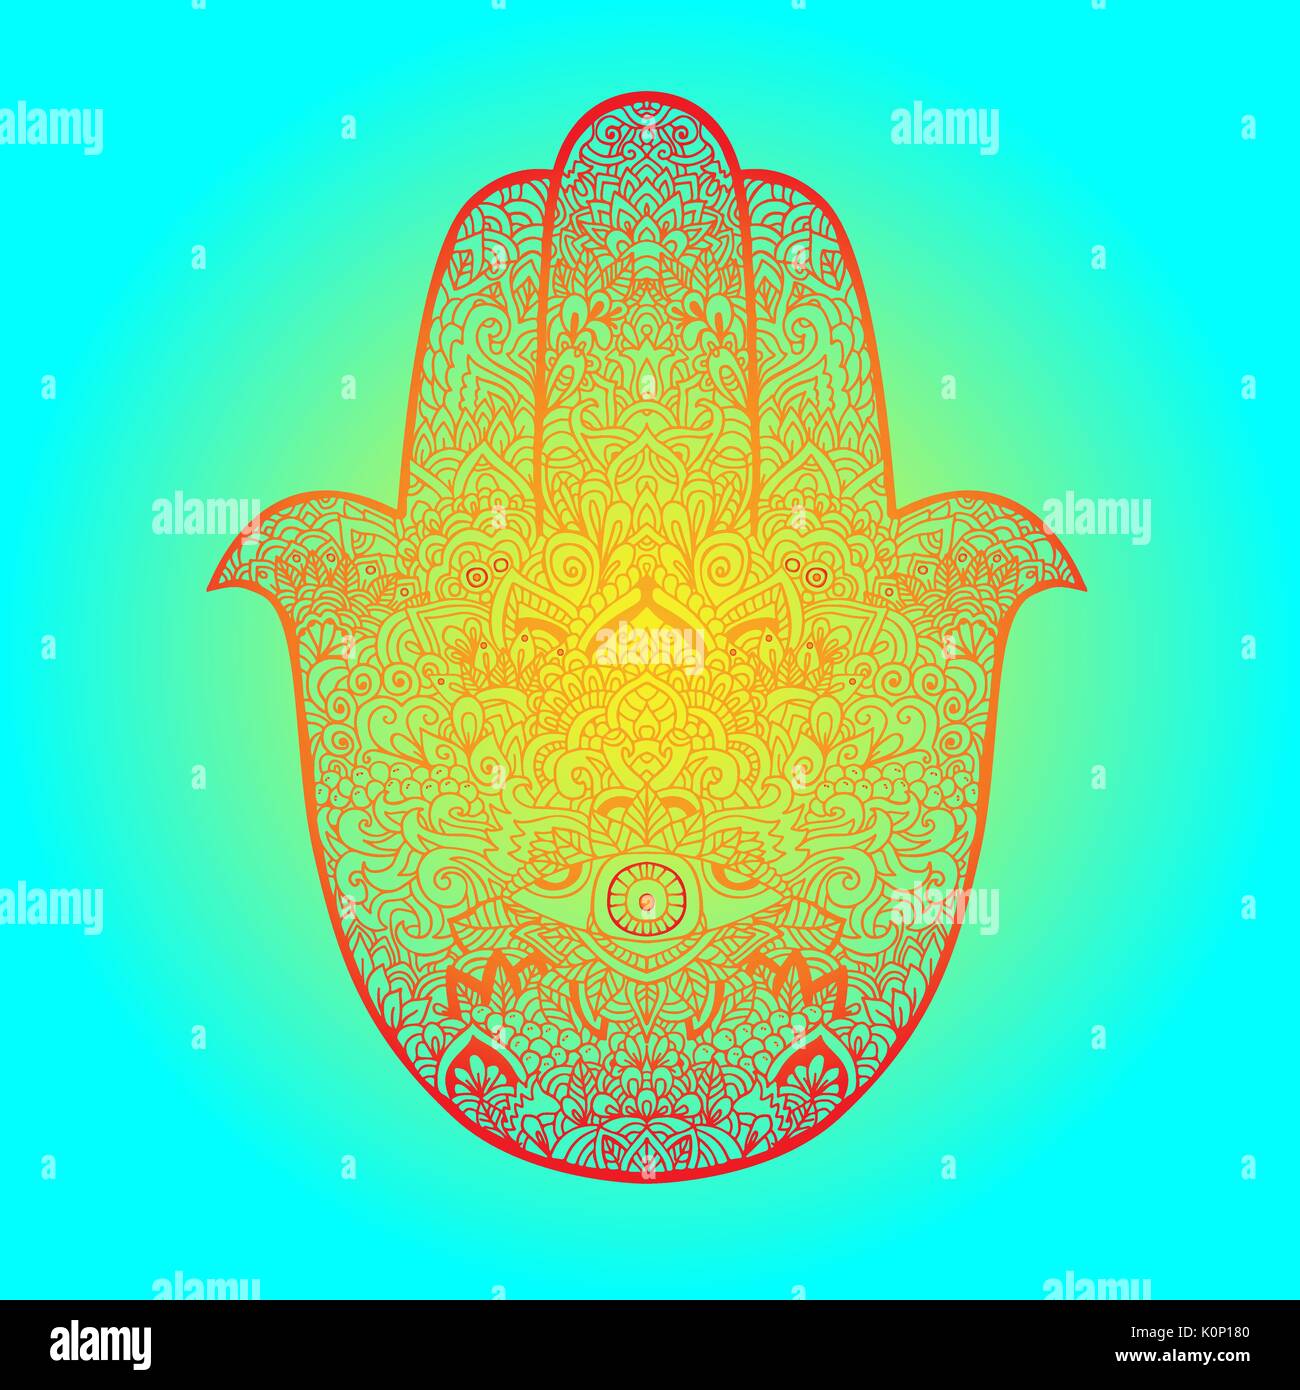 Hamsa hand drawn symbol. Fatima hand pattern. Vector illustration. Indian esoterics ornament for adult coloring books. Asian pattern. Gradient authentic background. Stock Vector